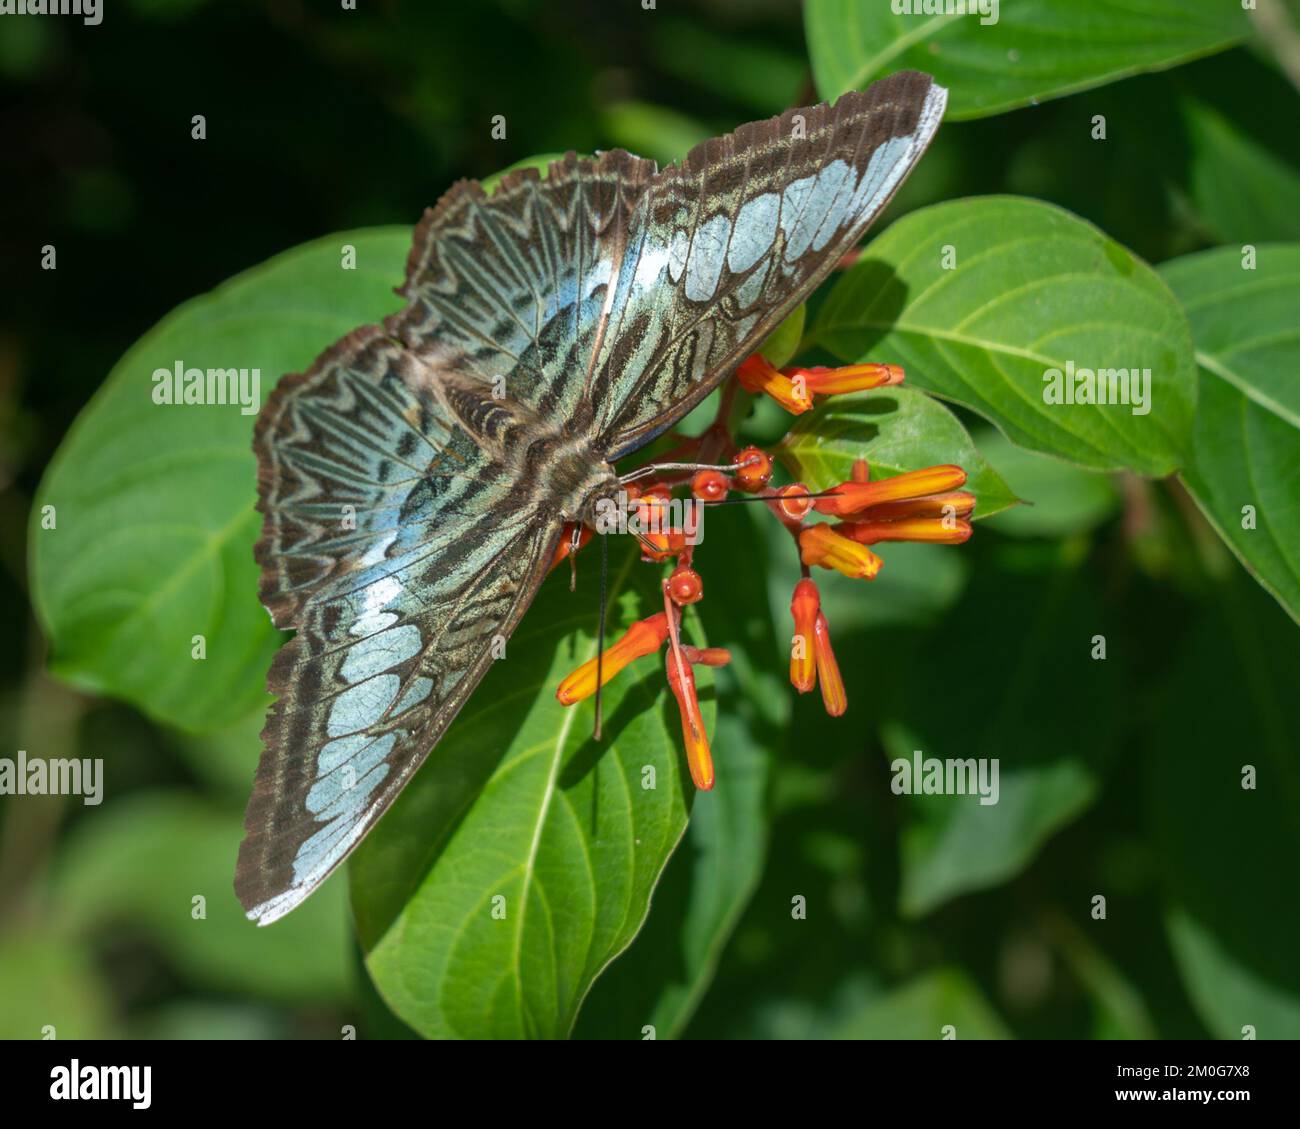 Closeup view of blue and brown parhenos sylvia clipper butterfly feeding outdoors on hamelia patens firebush orange flowers Stock Photo